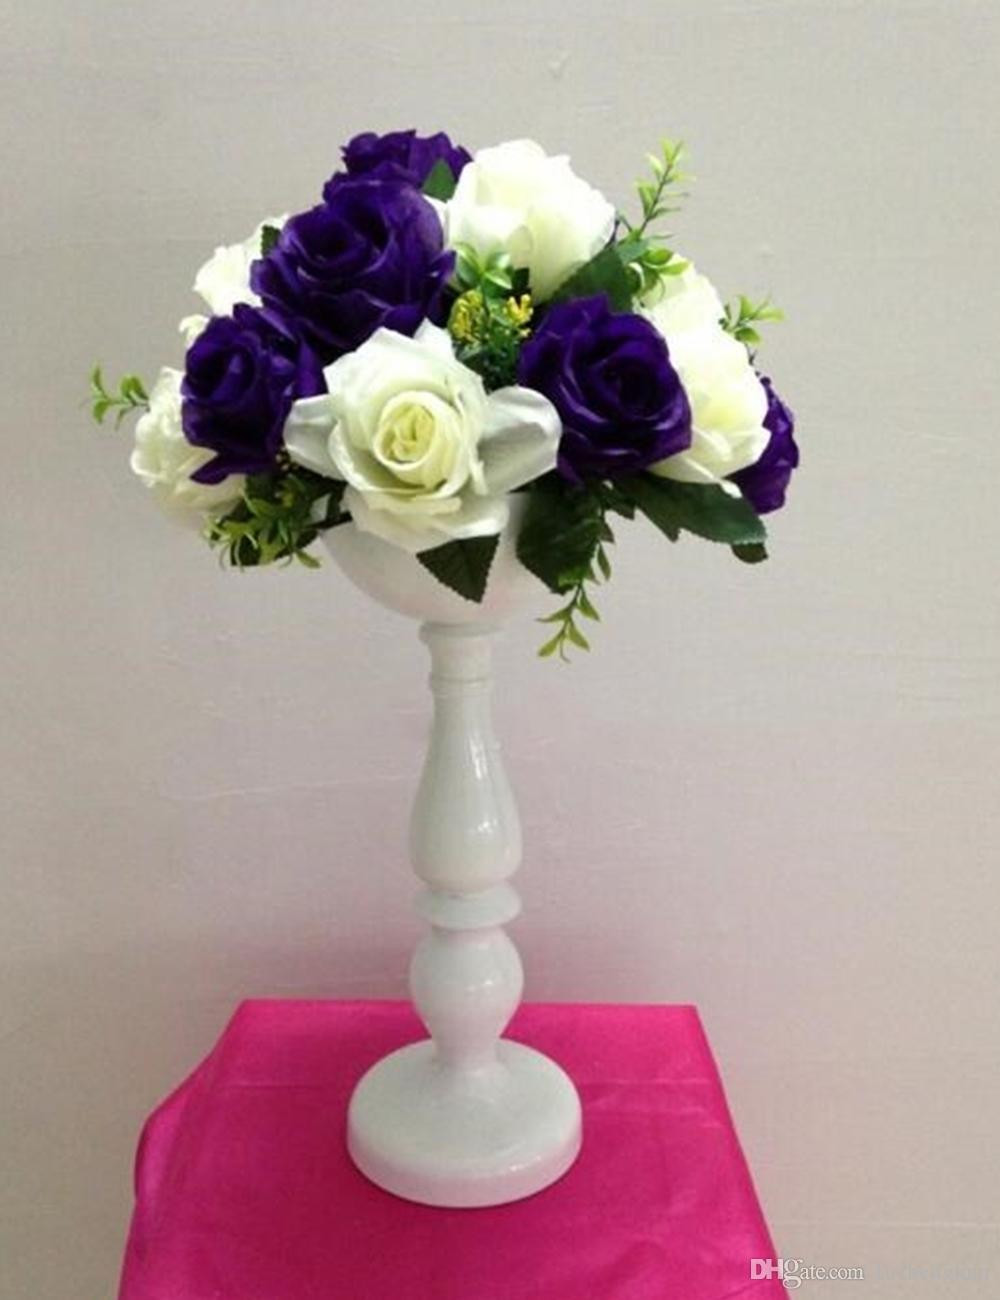 22 Awesome Vase Base Stand 2022 free download vase base stand of new arrive 37 cm tall white metal flower vase wedding table pertaining to new arrive 37 cm tall white metal flower vase wedding table centerpiece event home decor hotel ro